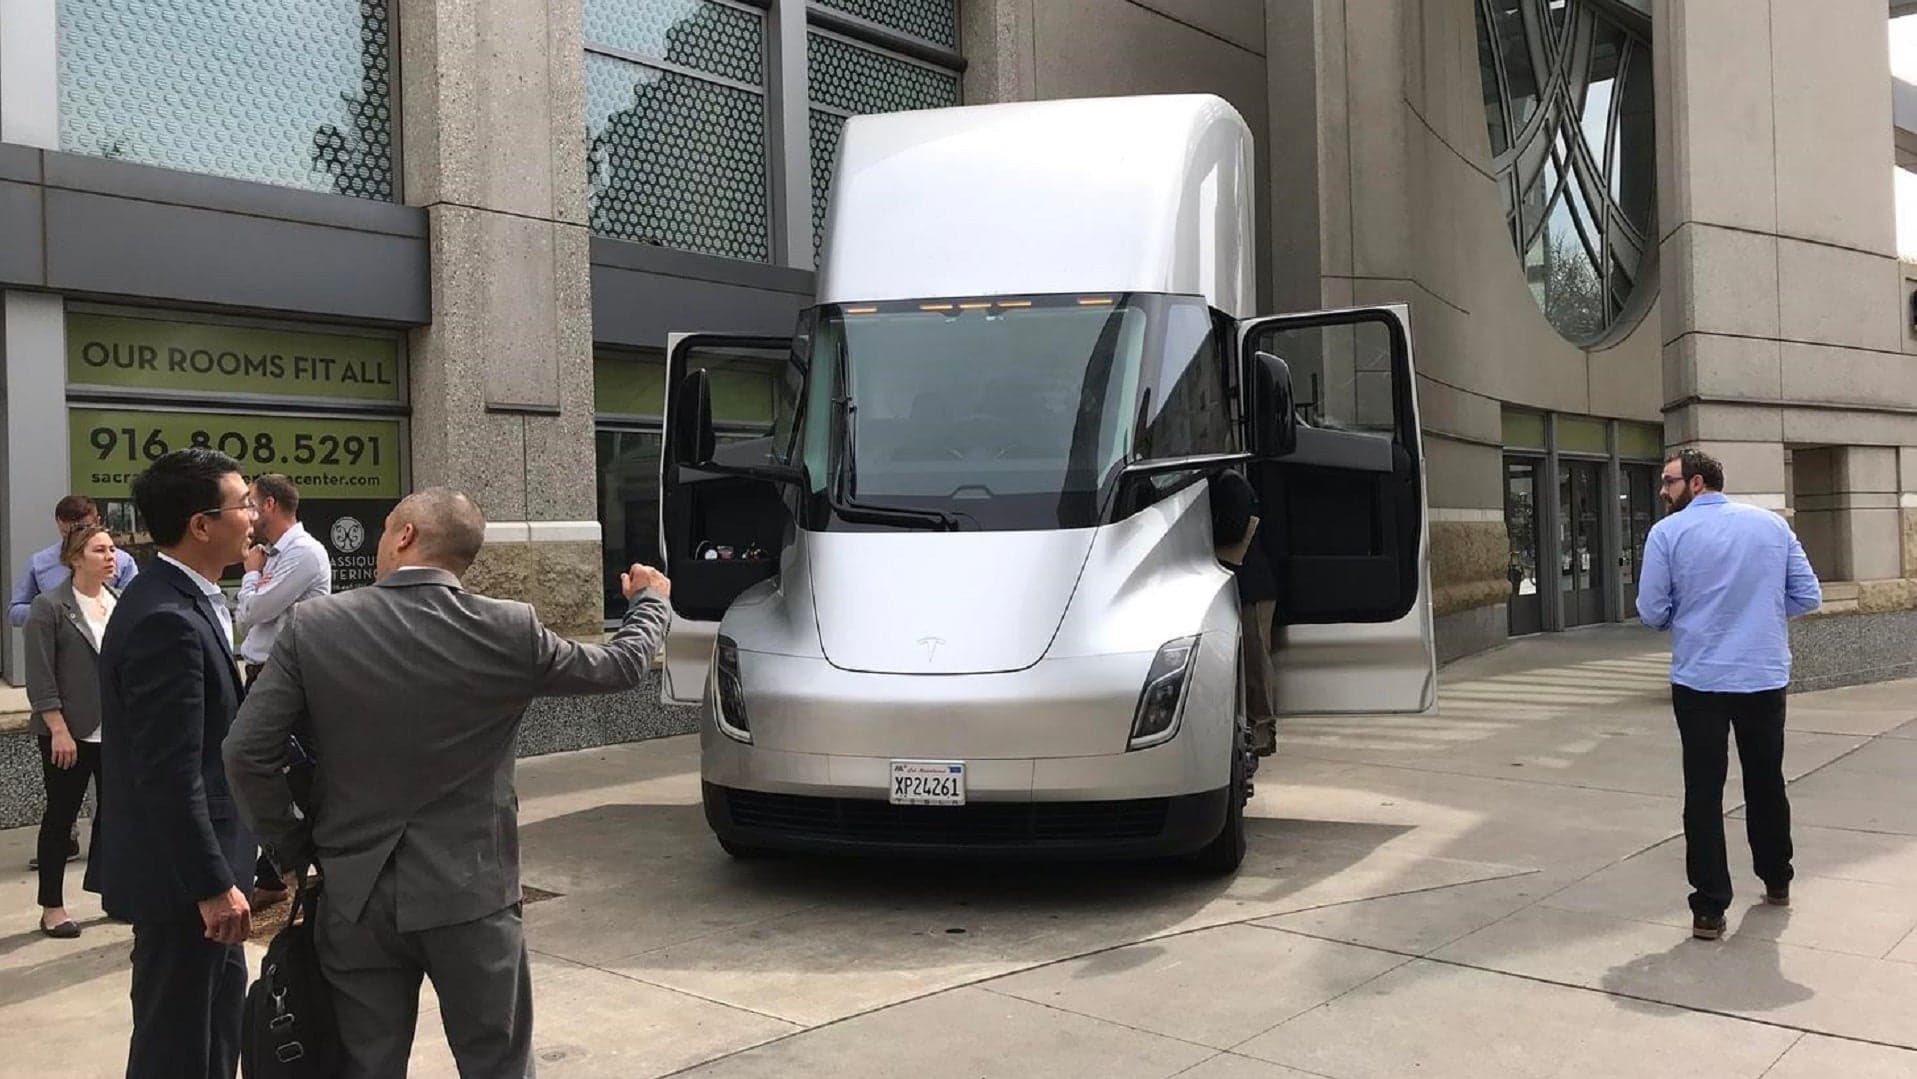 This Is What the Cockpit of the Upcoming Tesla Semi Truck Looks Like